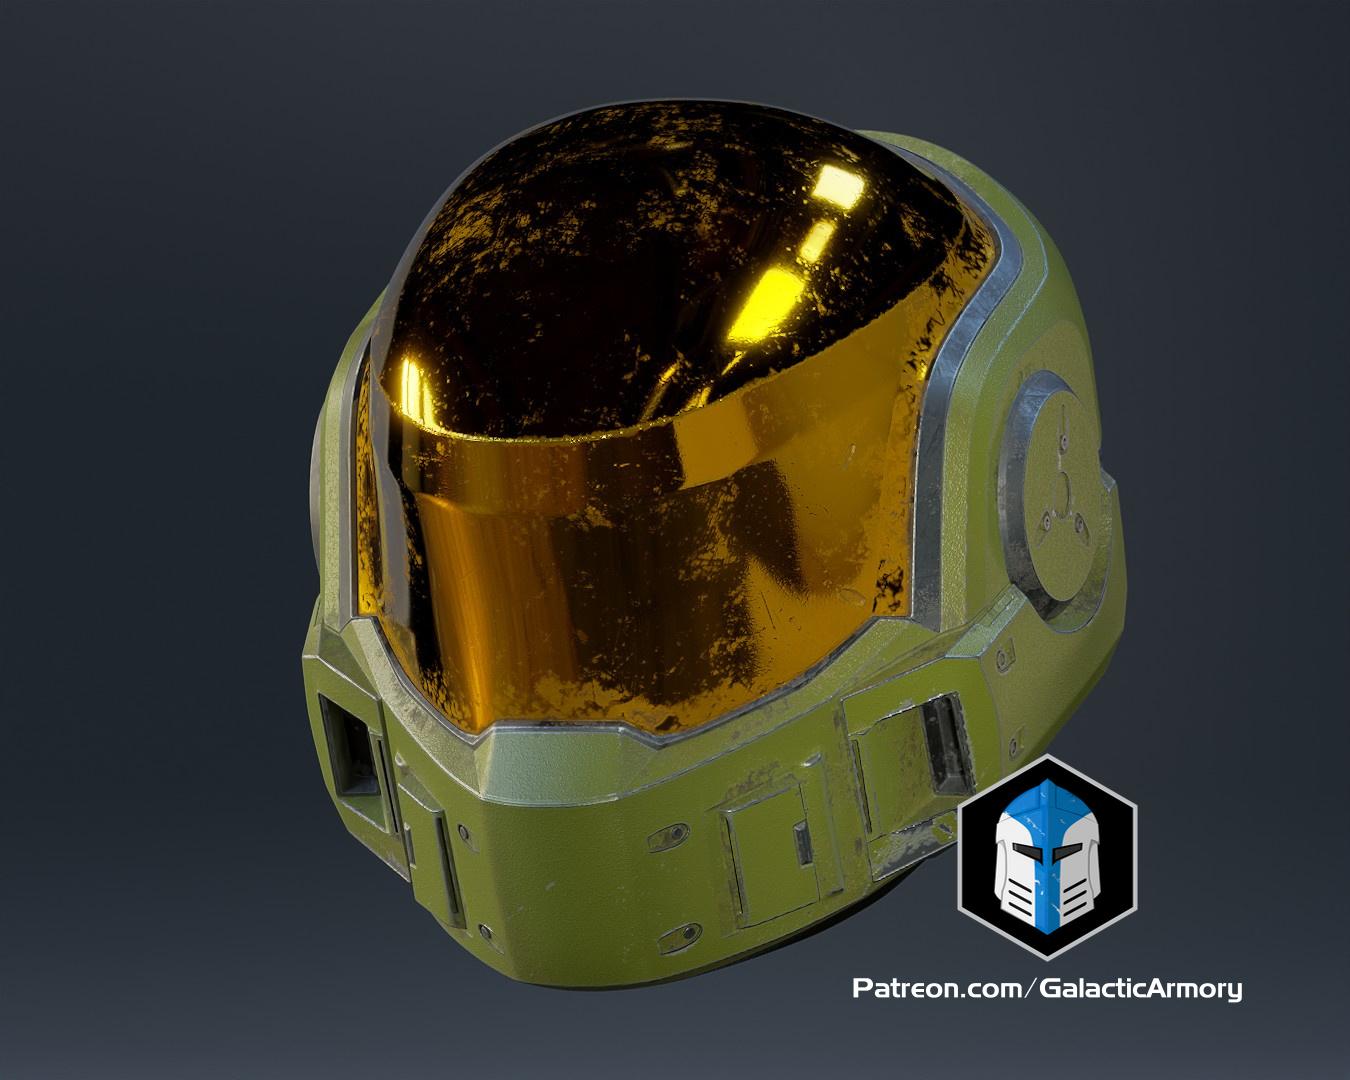 [New Files!] The Halo Infinite Mirage helmet has been added to the Specialist rewards!